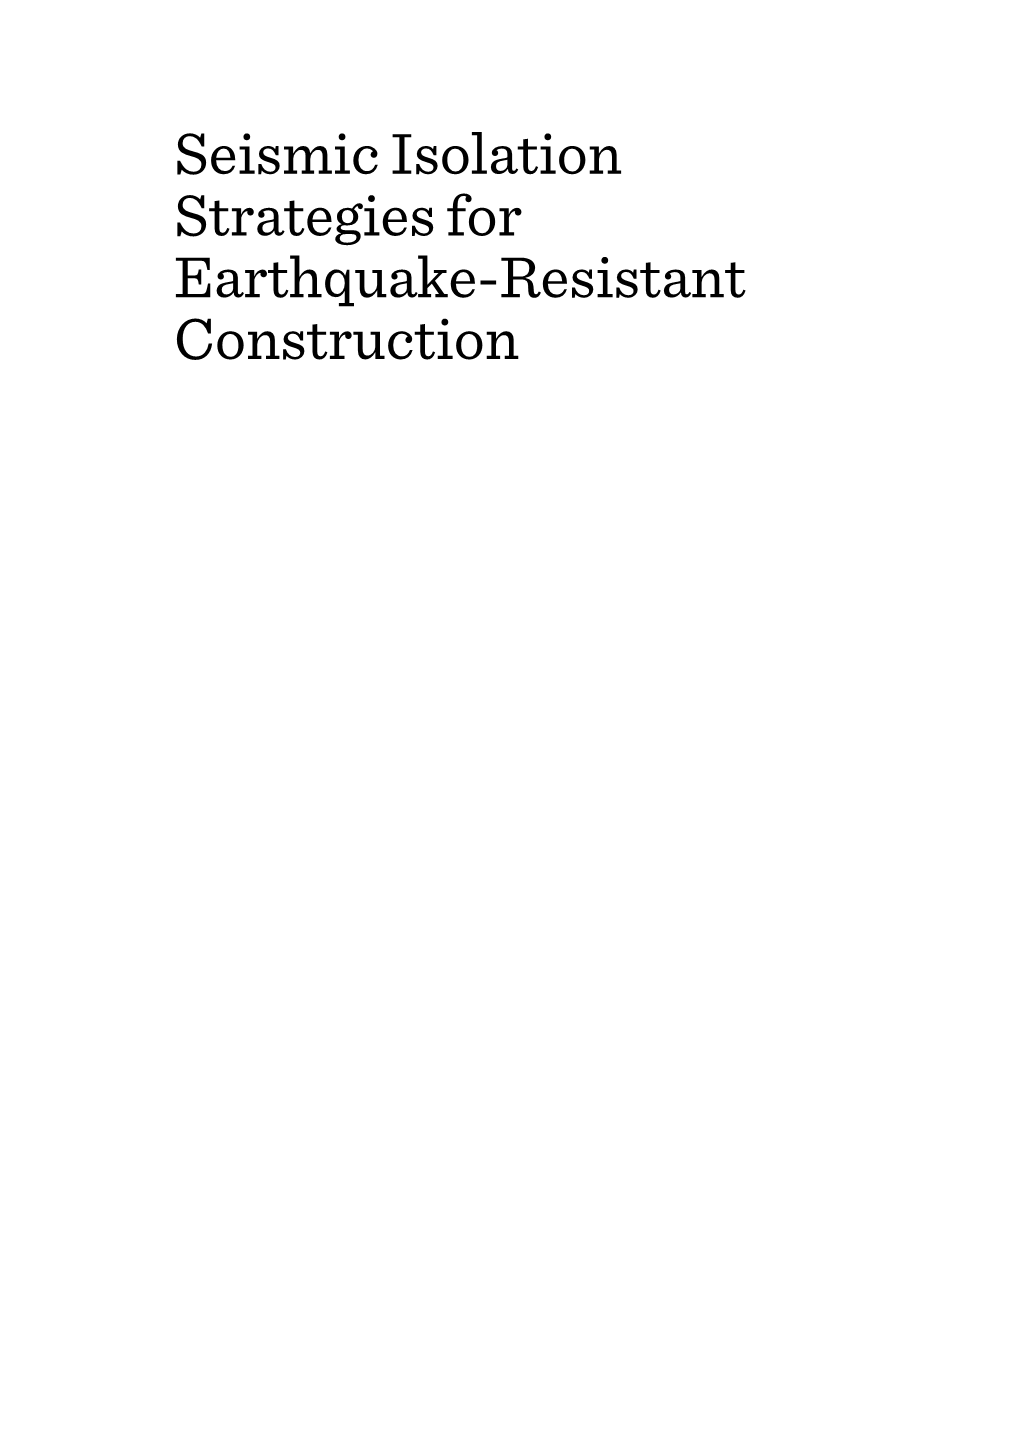 Seismic Isolation Strategies for Earthquake-Resistant Construction